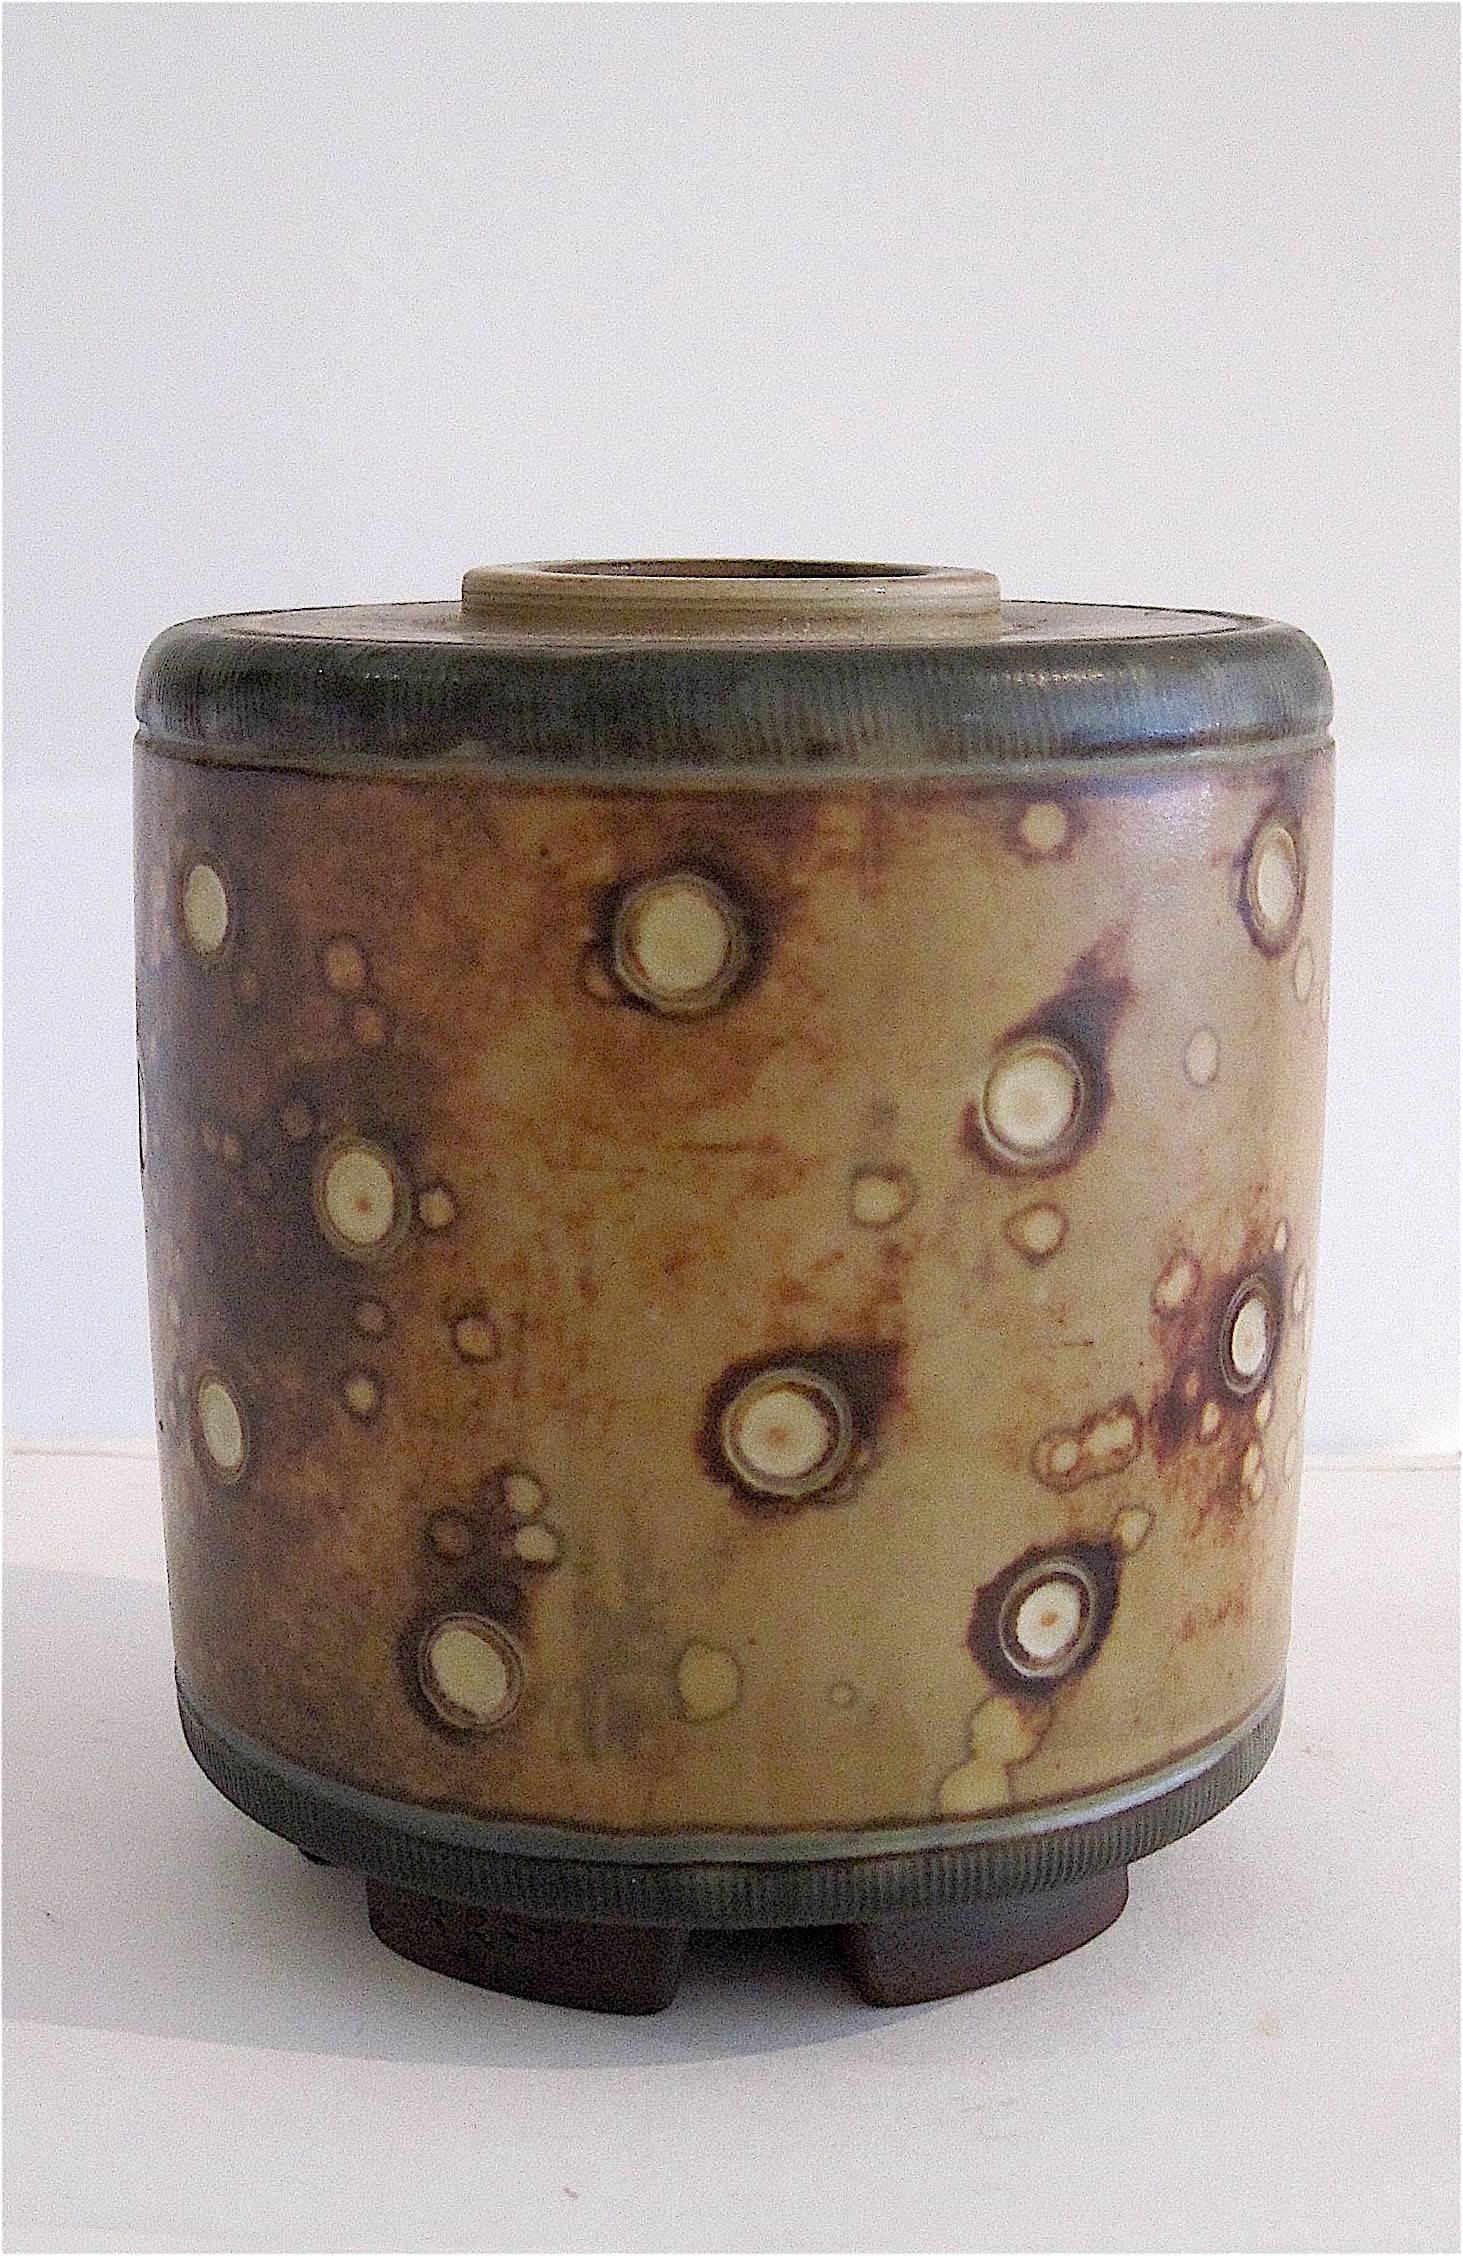 Excellent hand thrown Kage Farsta stoneware vase with matte finish yellow/ochre glaze and incised highlights. Hand signed and stamped, with label, as shown. The world renown Wilhelm Kage (1889 - 1960) was a Swedish artist, painter and ceramist. He